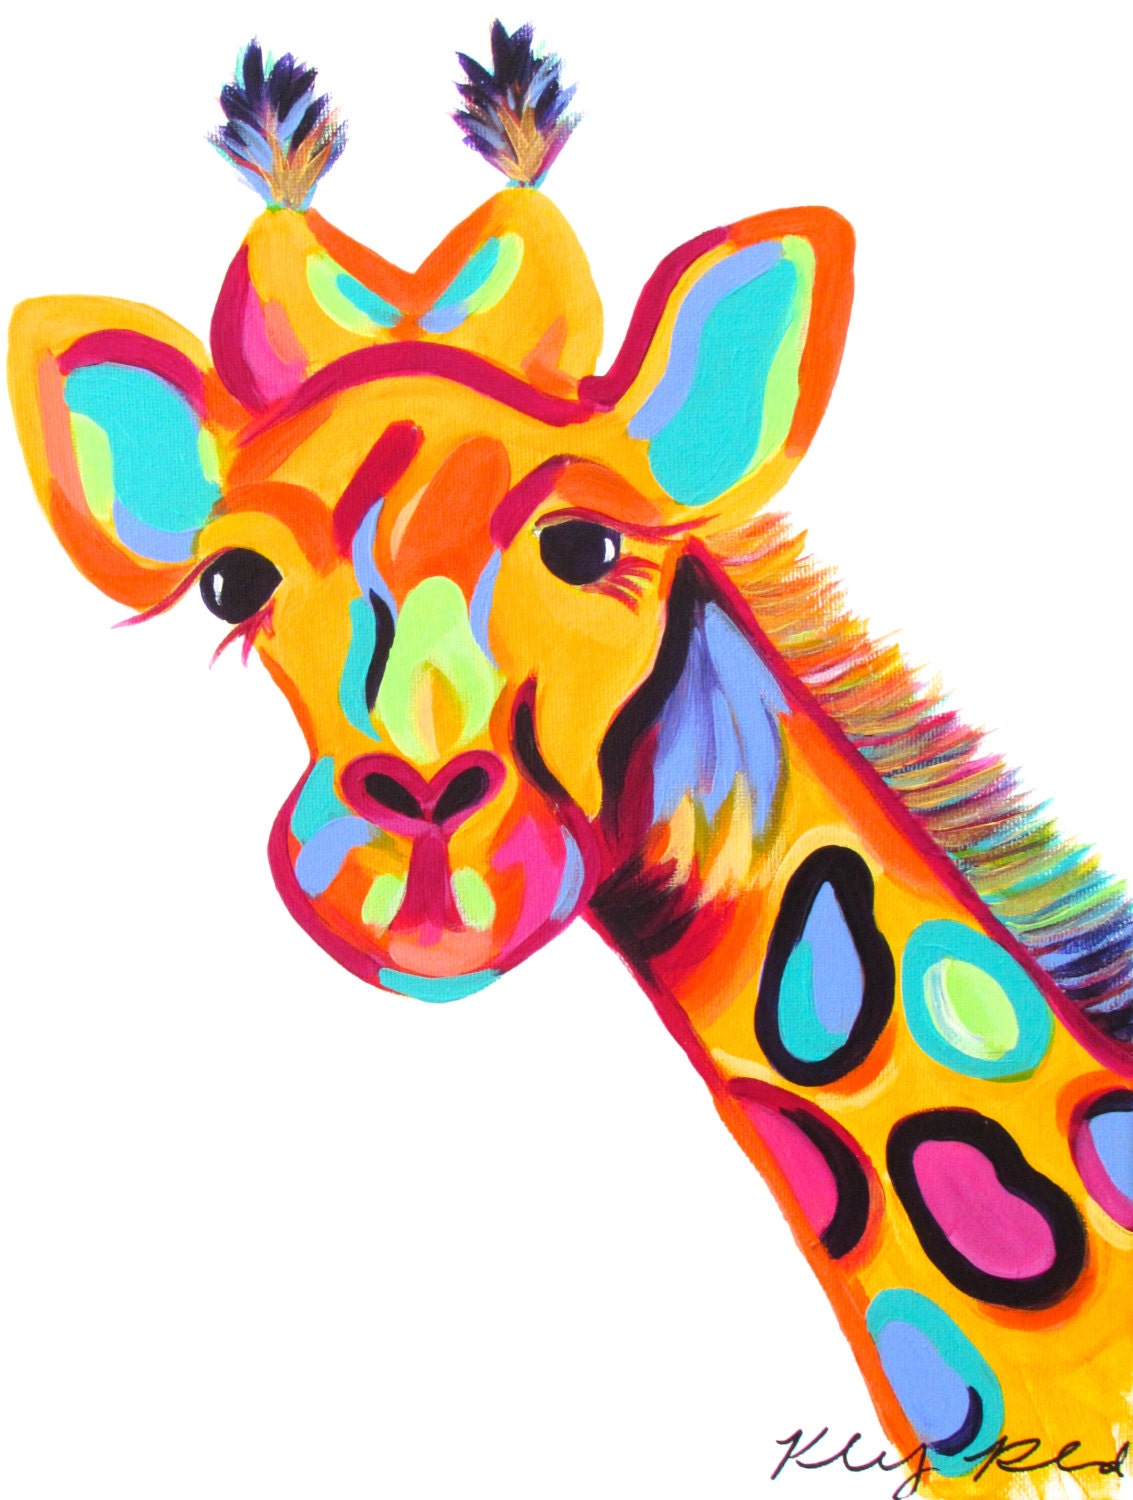 Colorful Giraffe Painting 1216 by Kelsey Rowland original